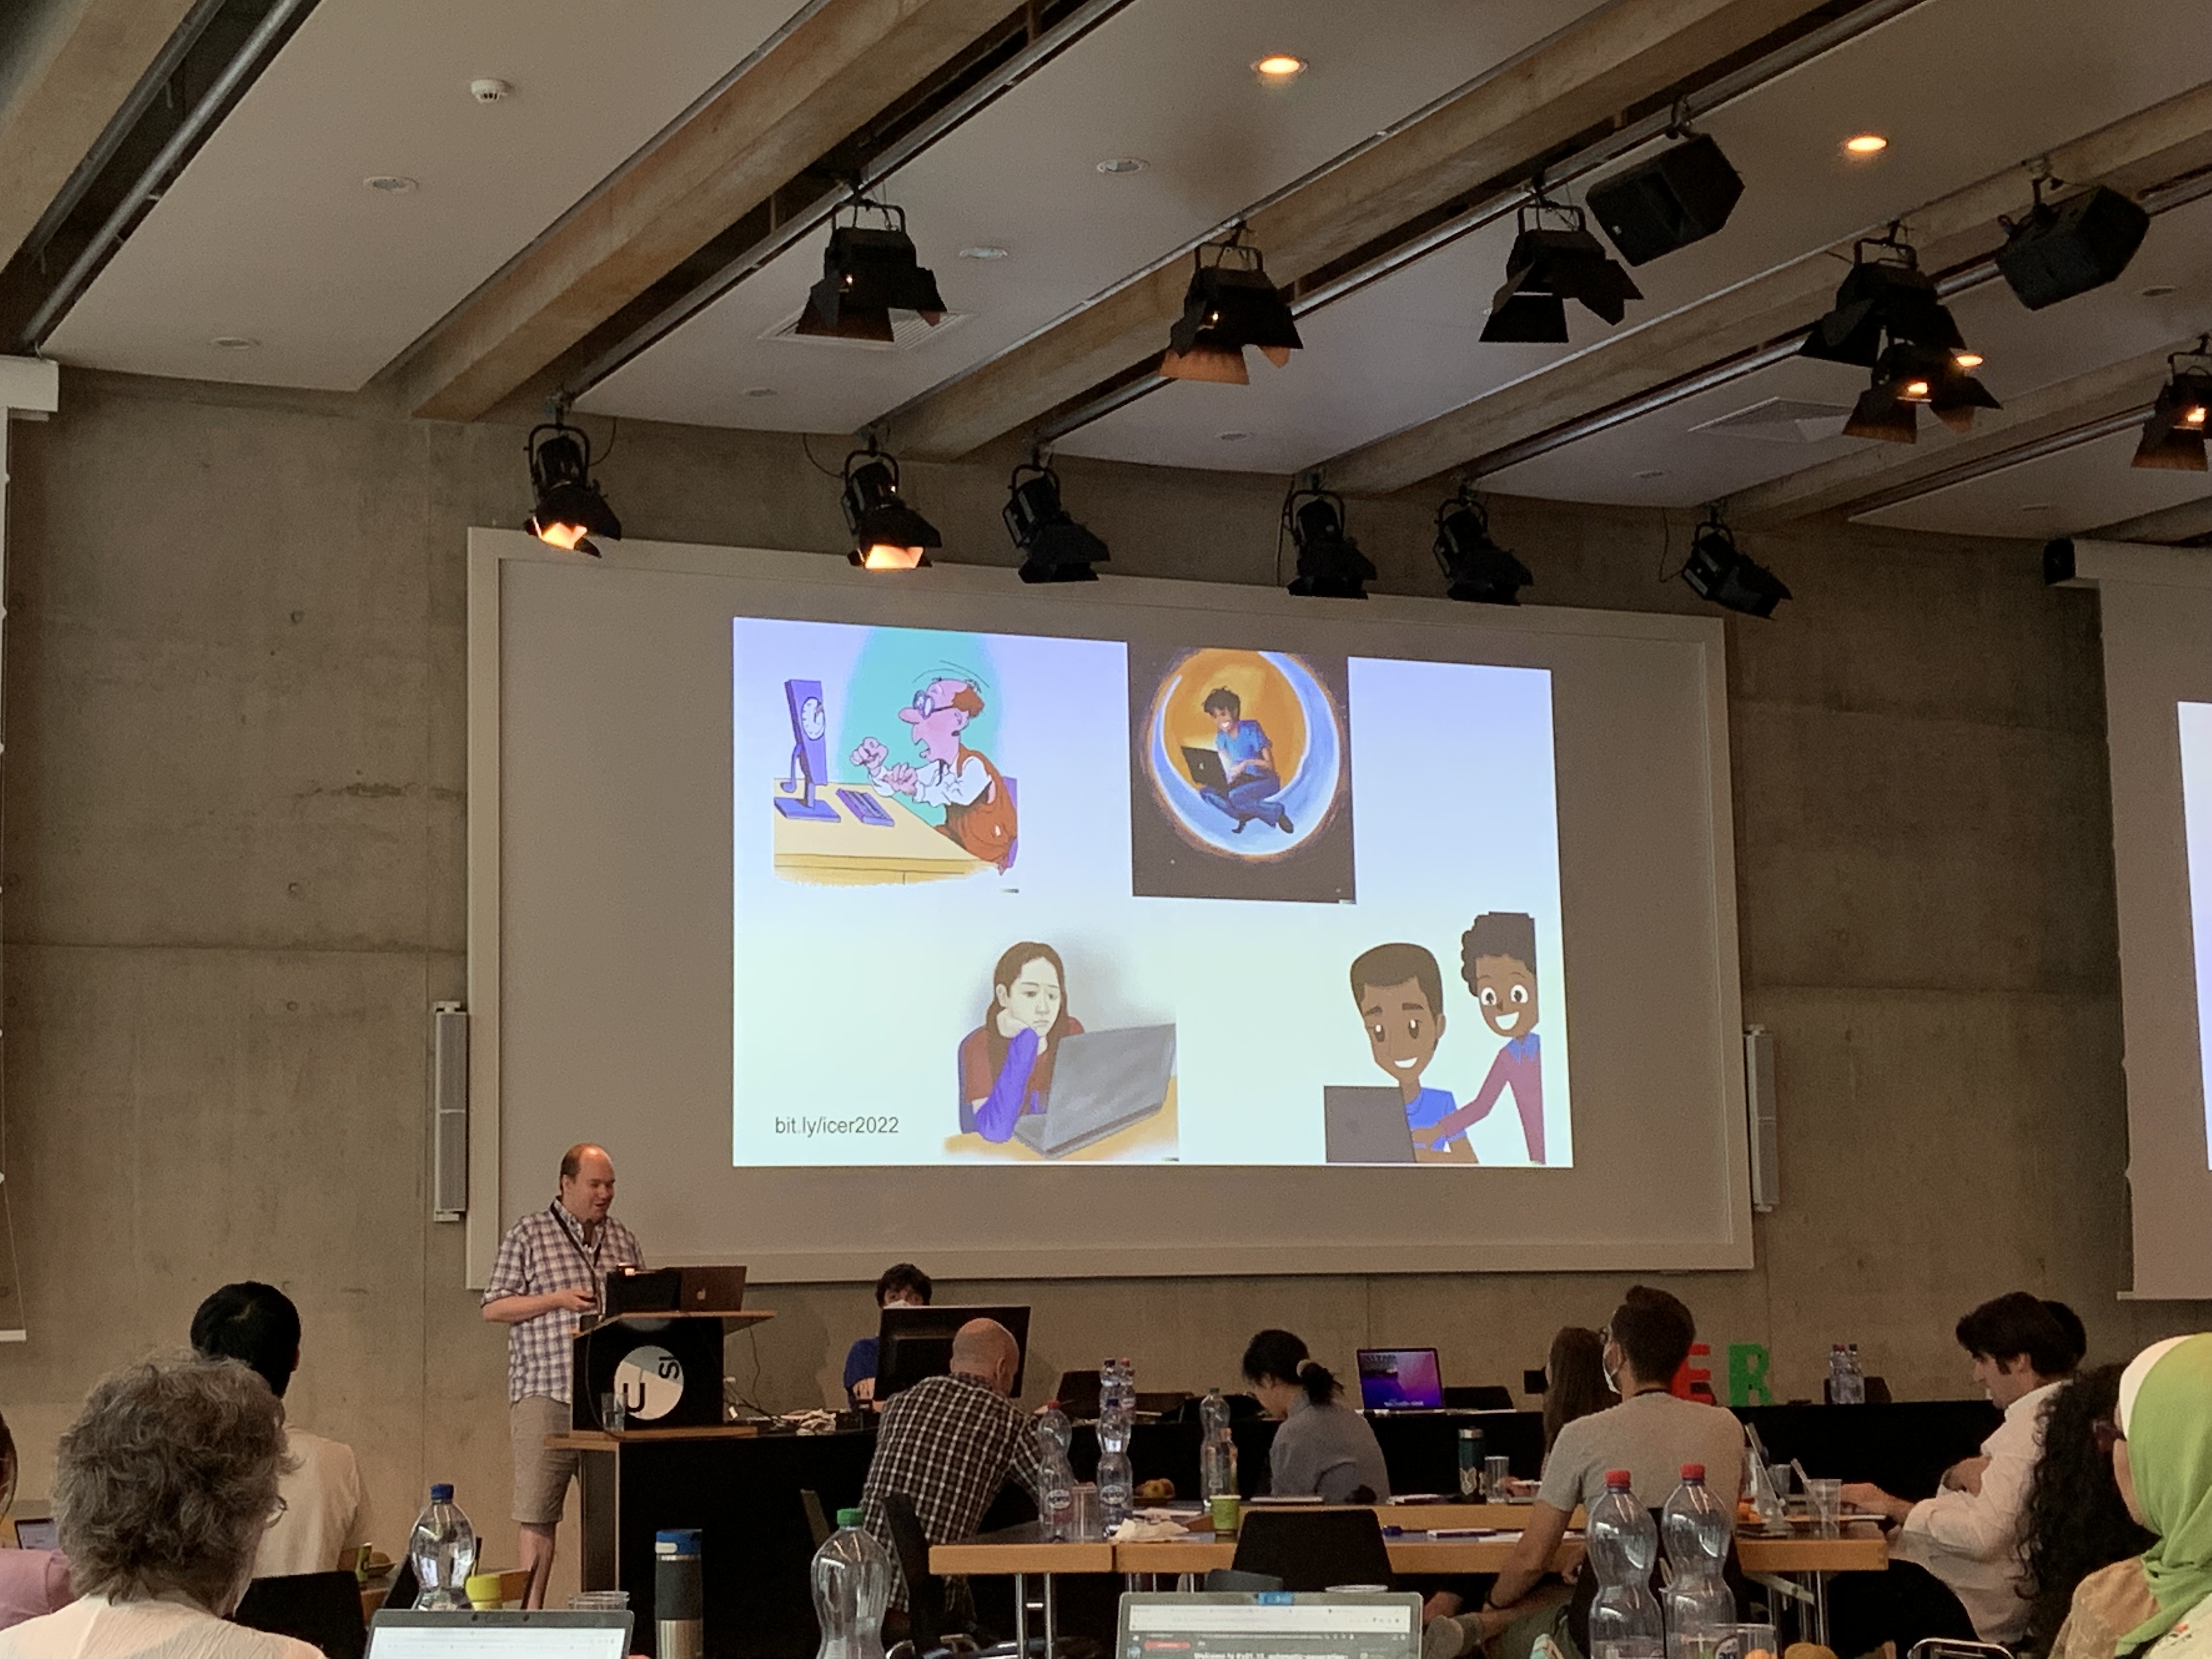 Juho Leinonen presents his work at ICER, standing in front of a large screen displaying examples of autogenerated images.